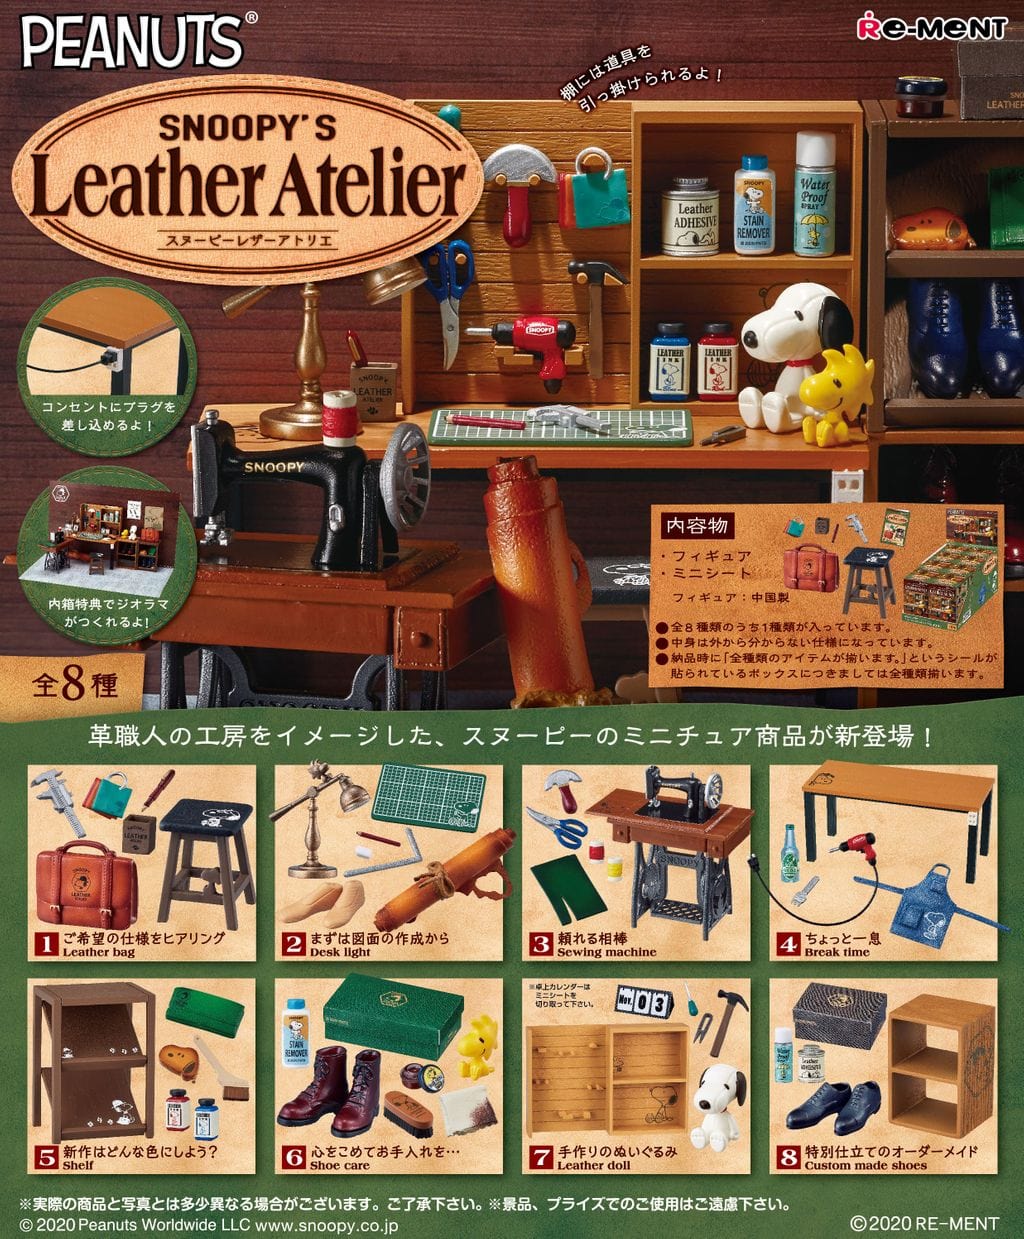 RE-MENT Snoopy Leather Atelier